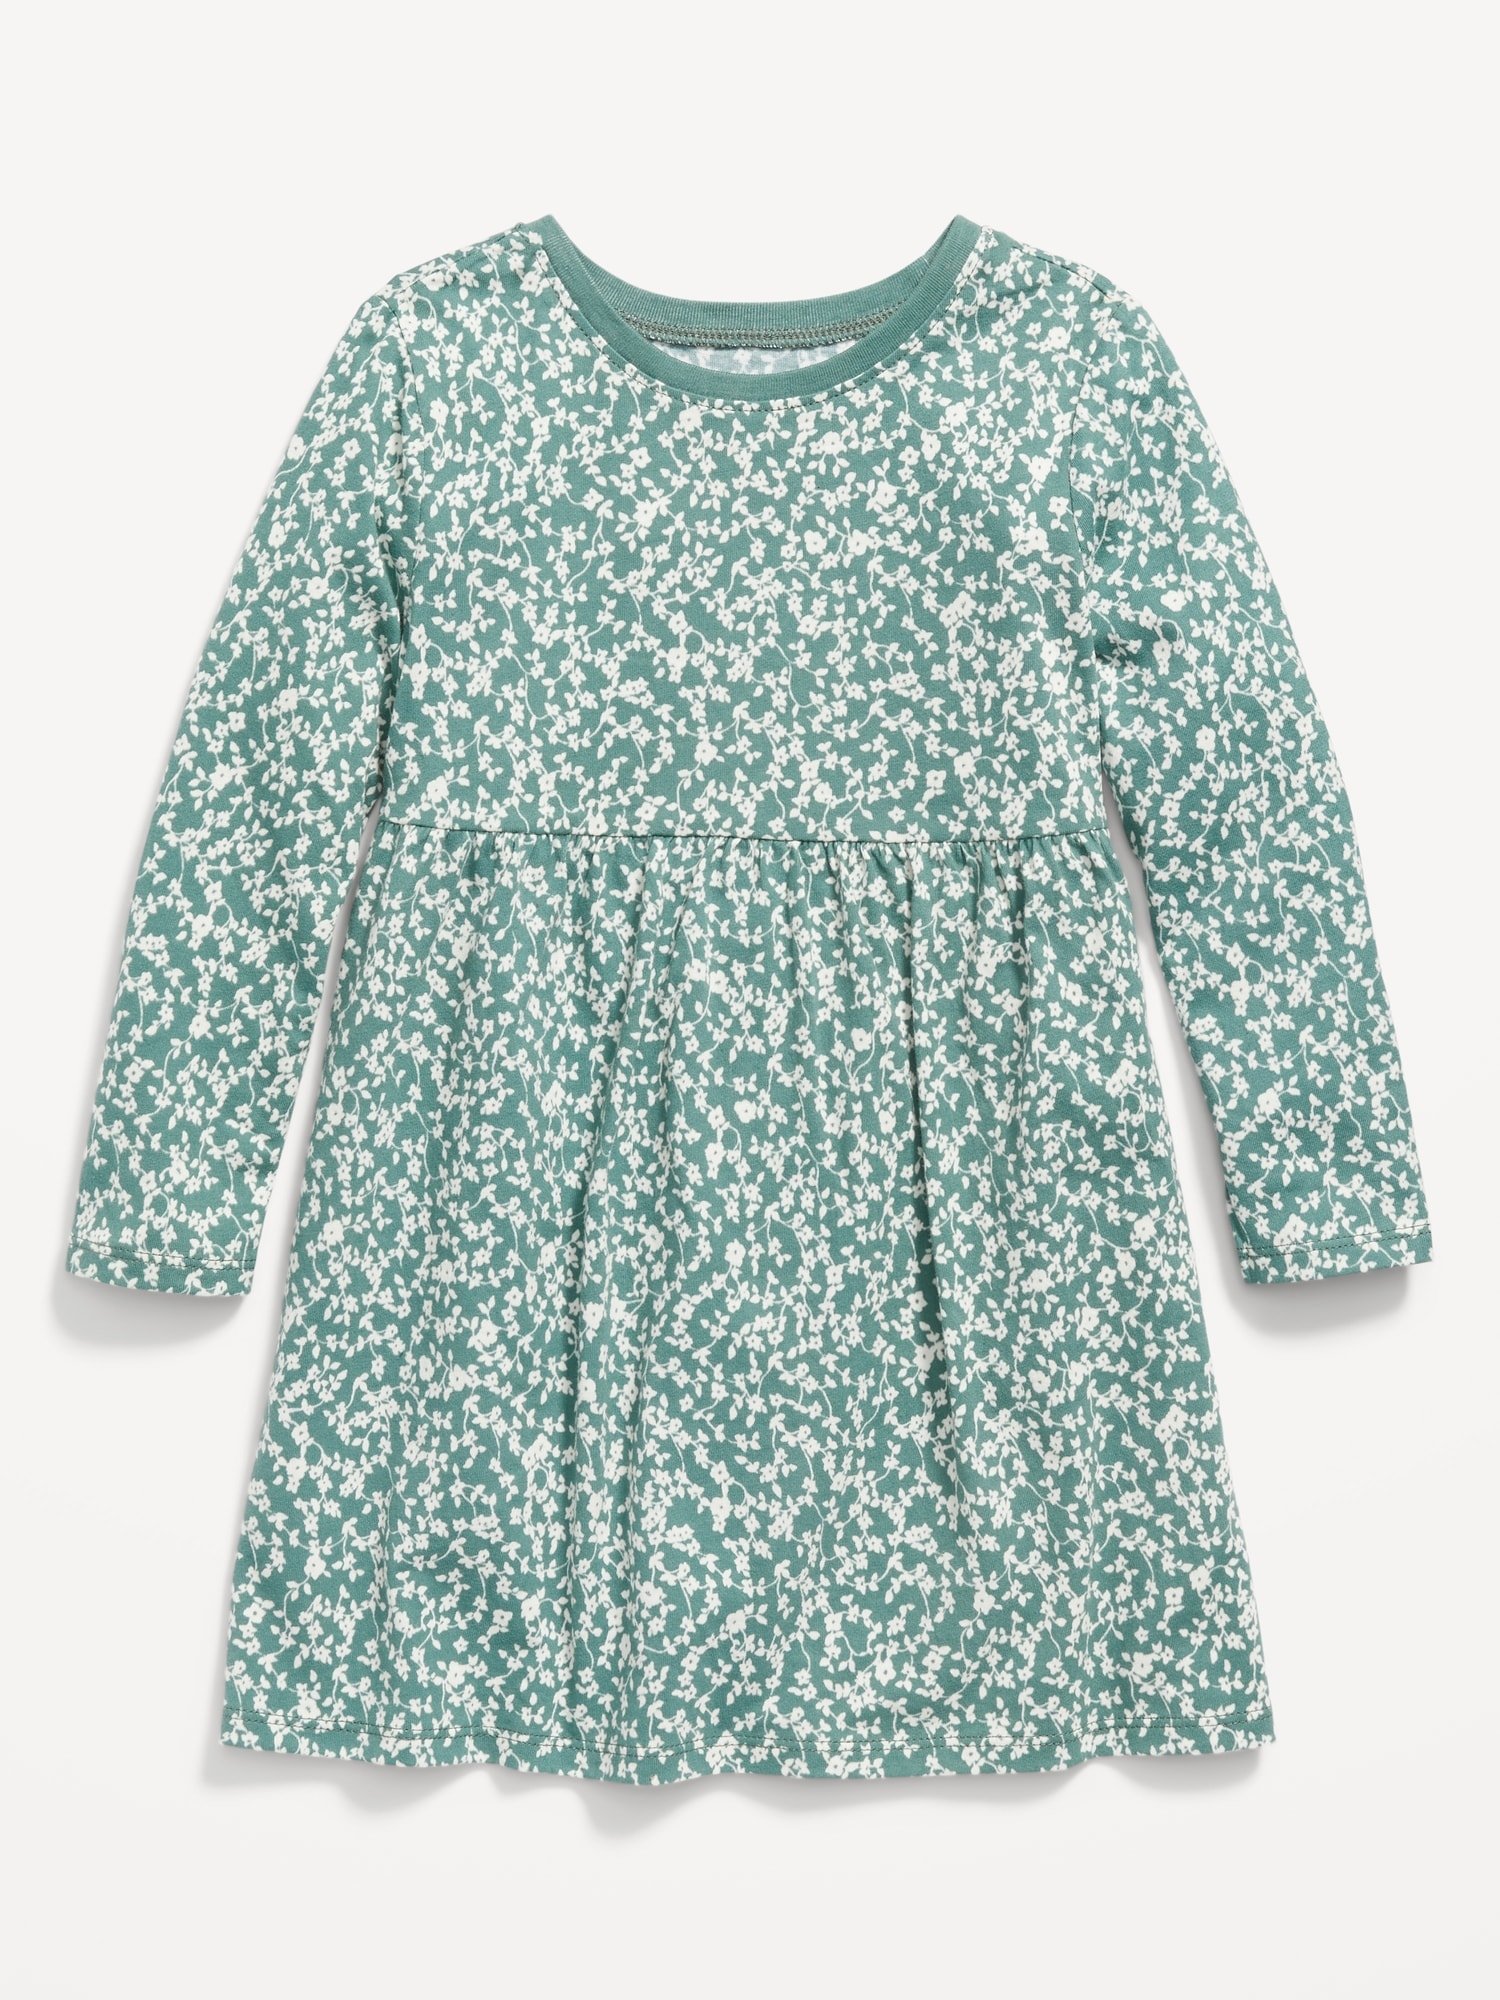 ONLINE EXCLUSIVE_Fit _ Flare Printed Jersey Dress for Toddler Girls_GreenFloral_795.jpeg